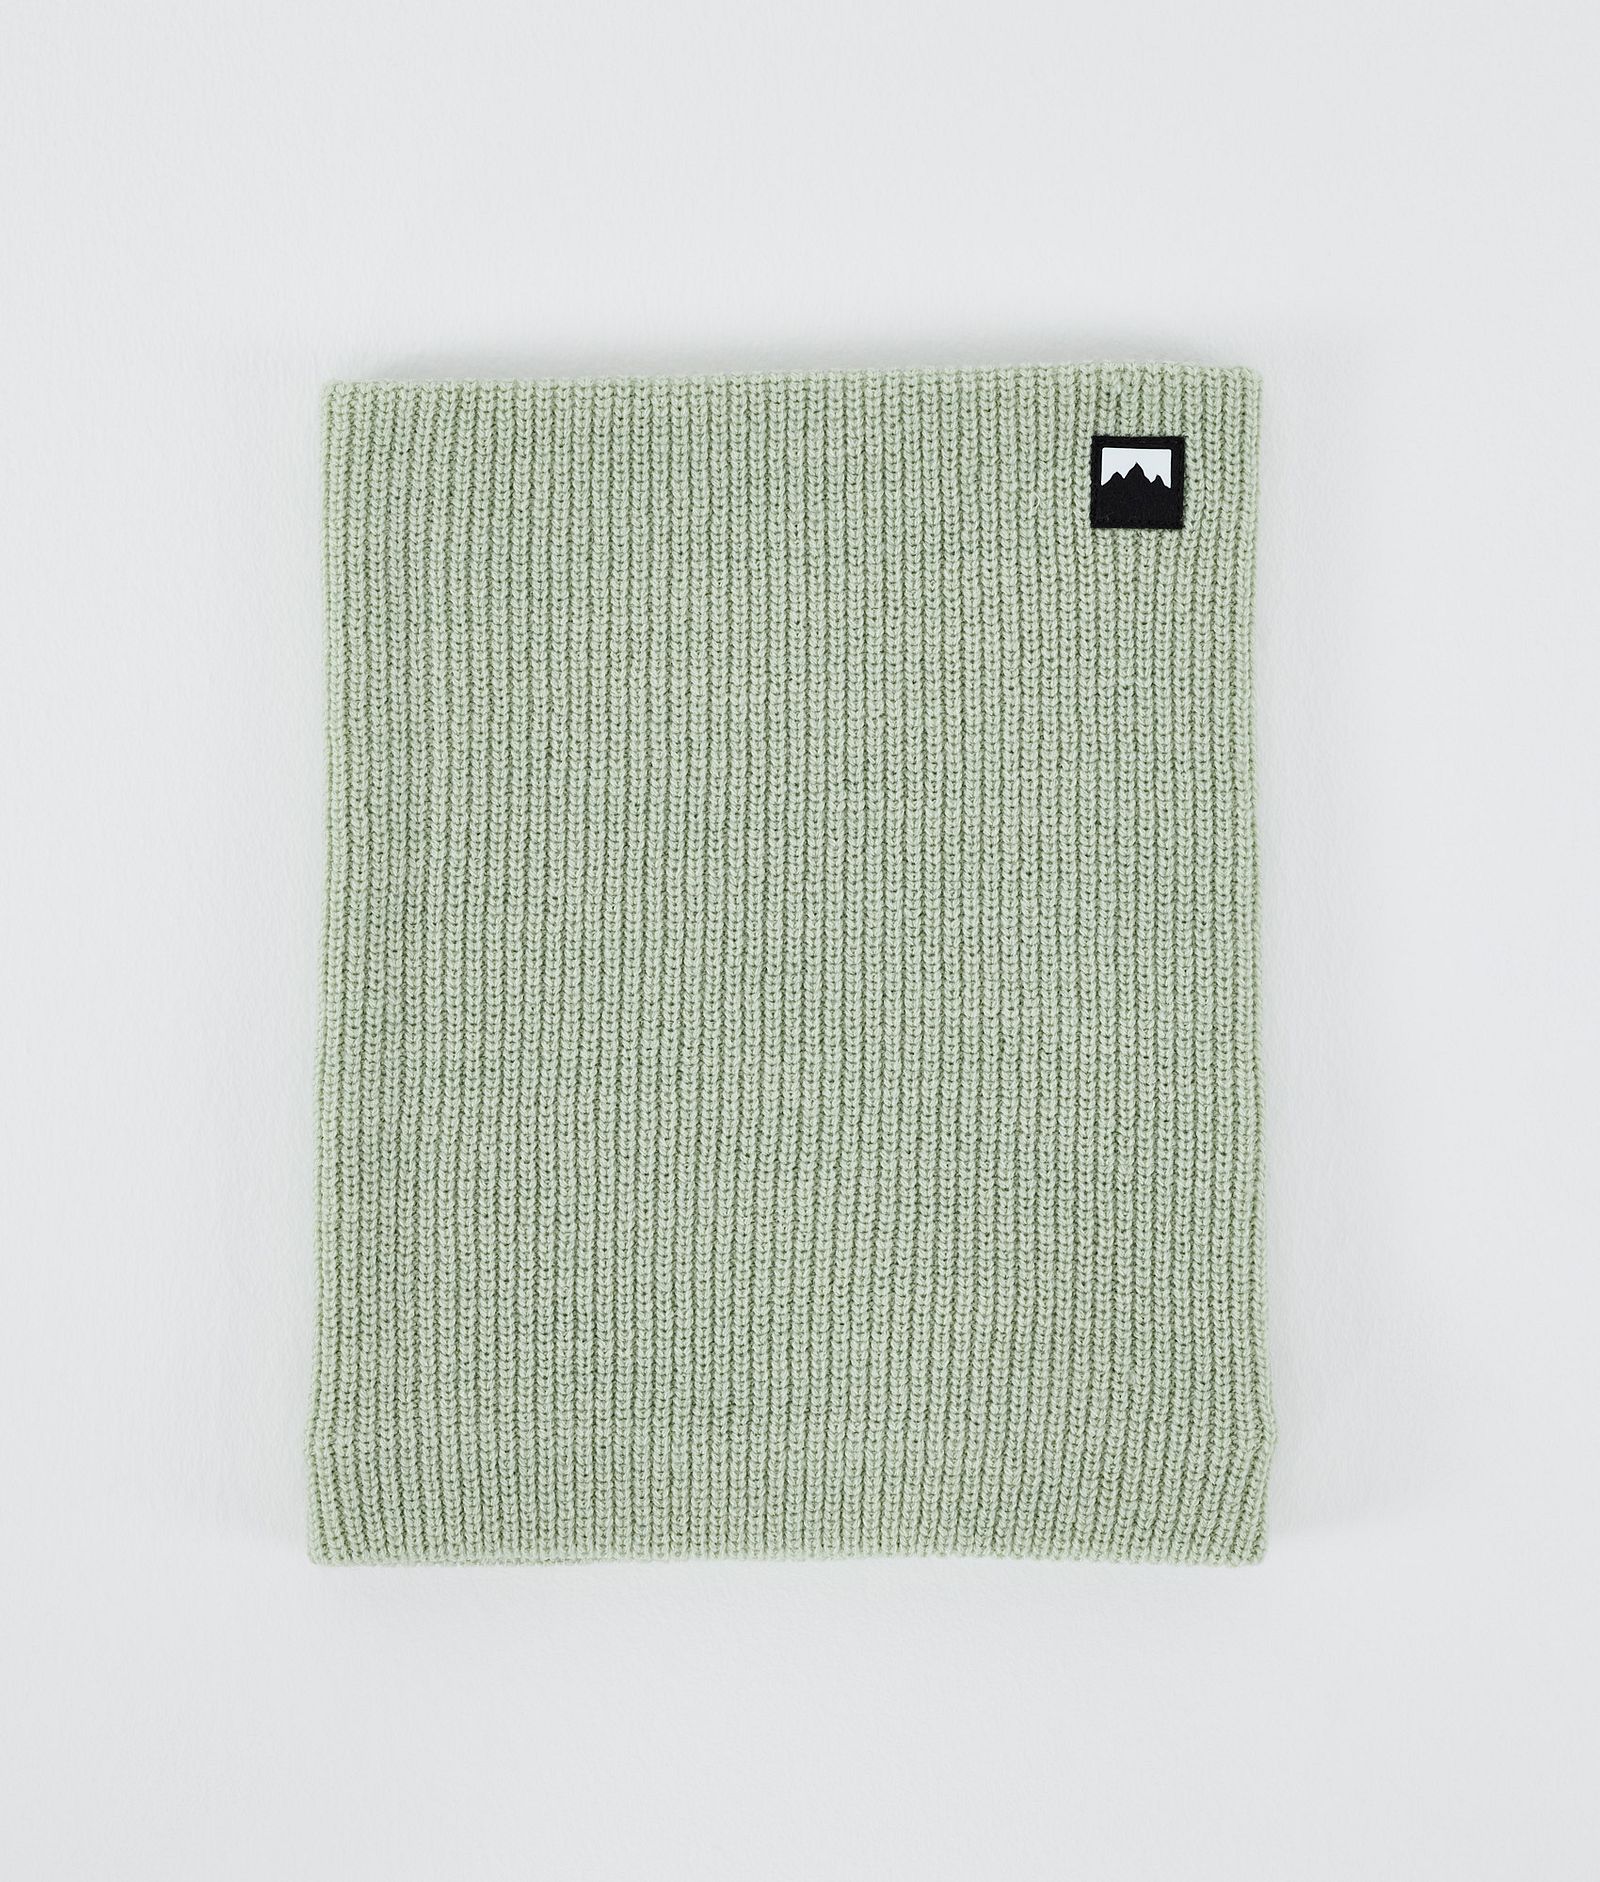 Classic Knitted 2022 Facemask Soft Green, Image 1 of 3